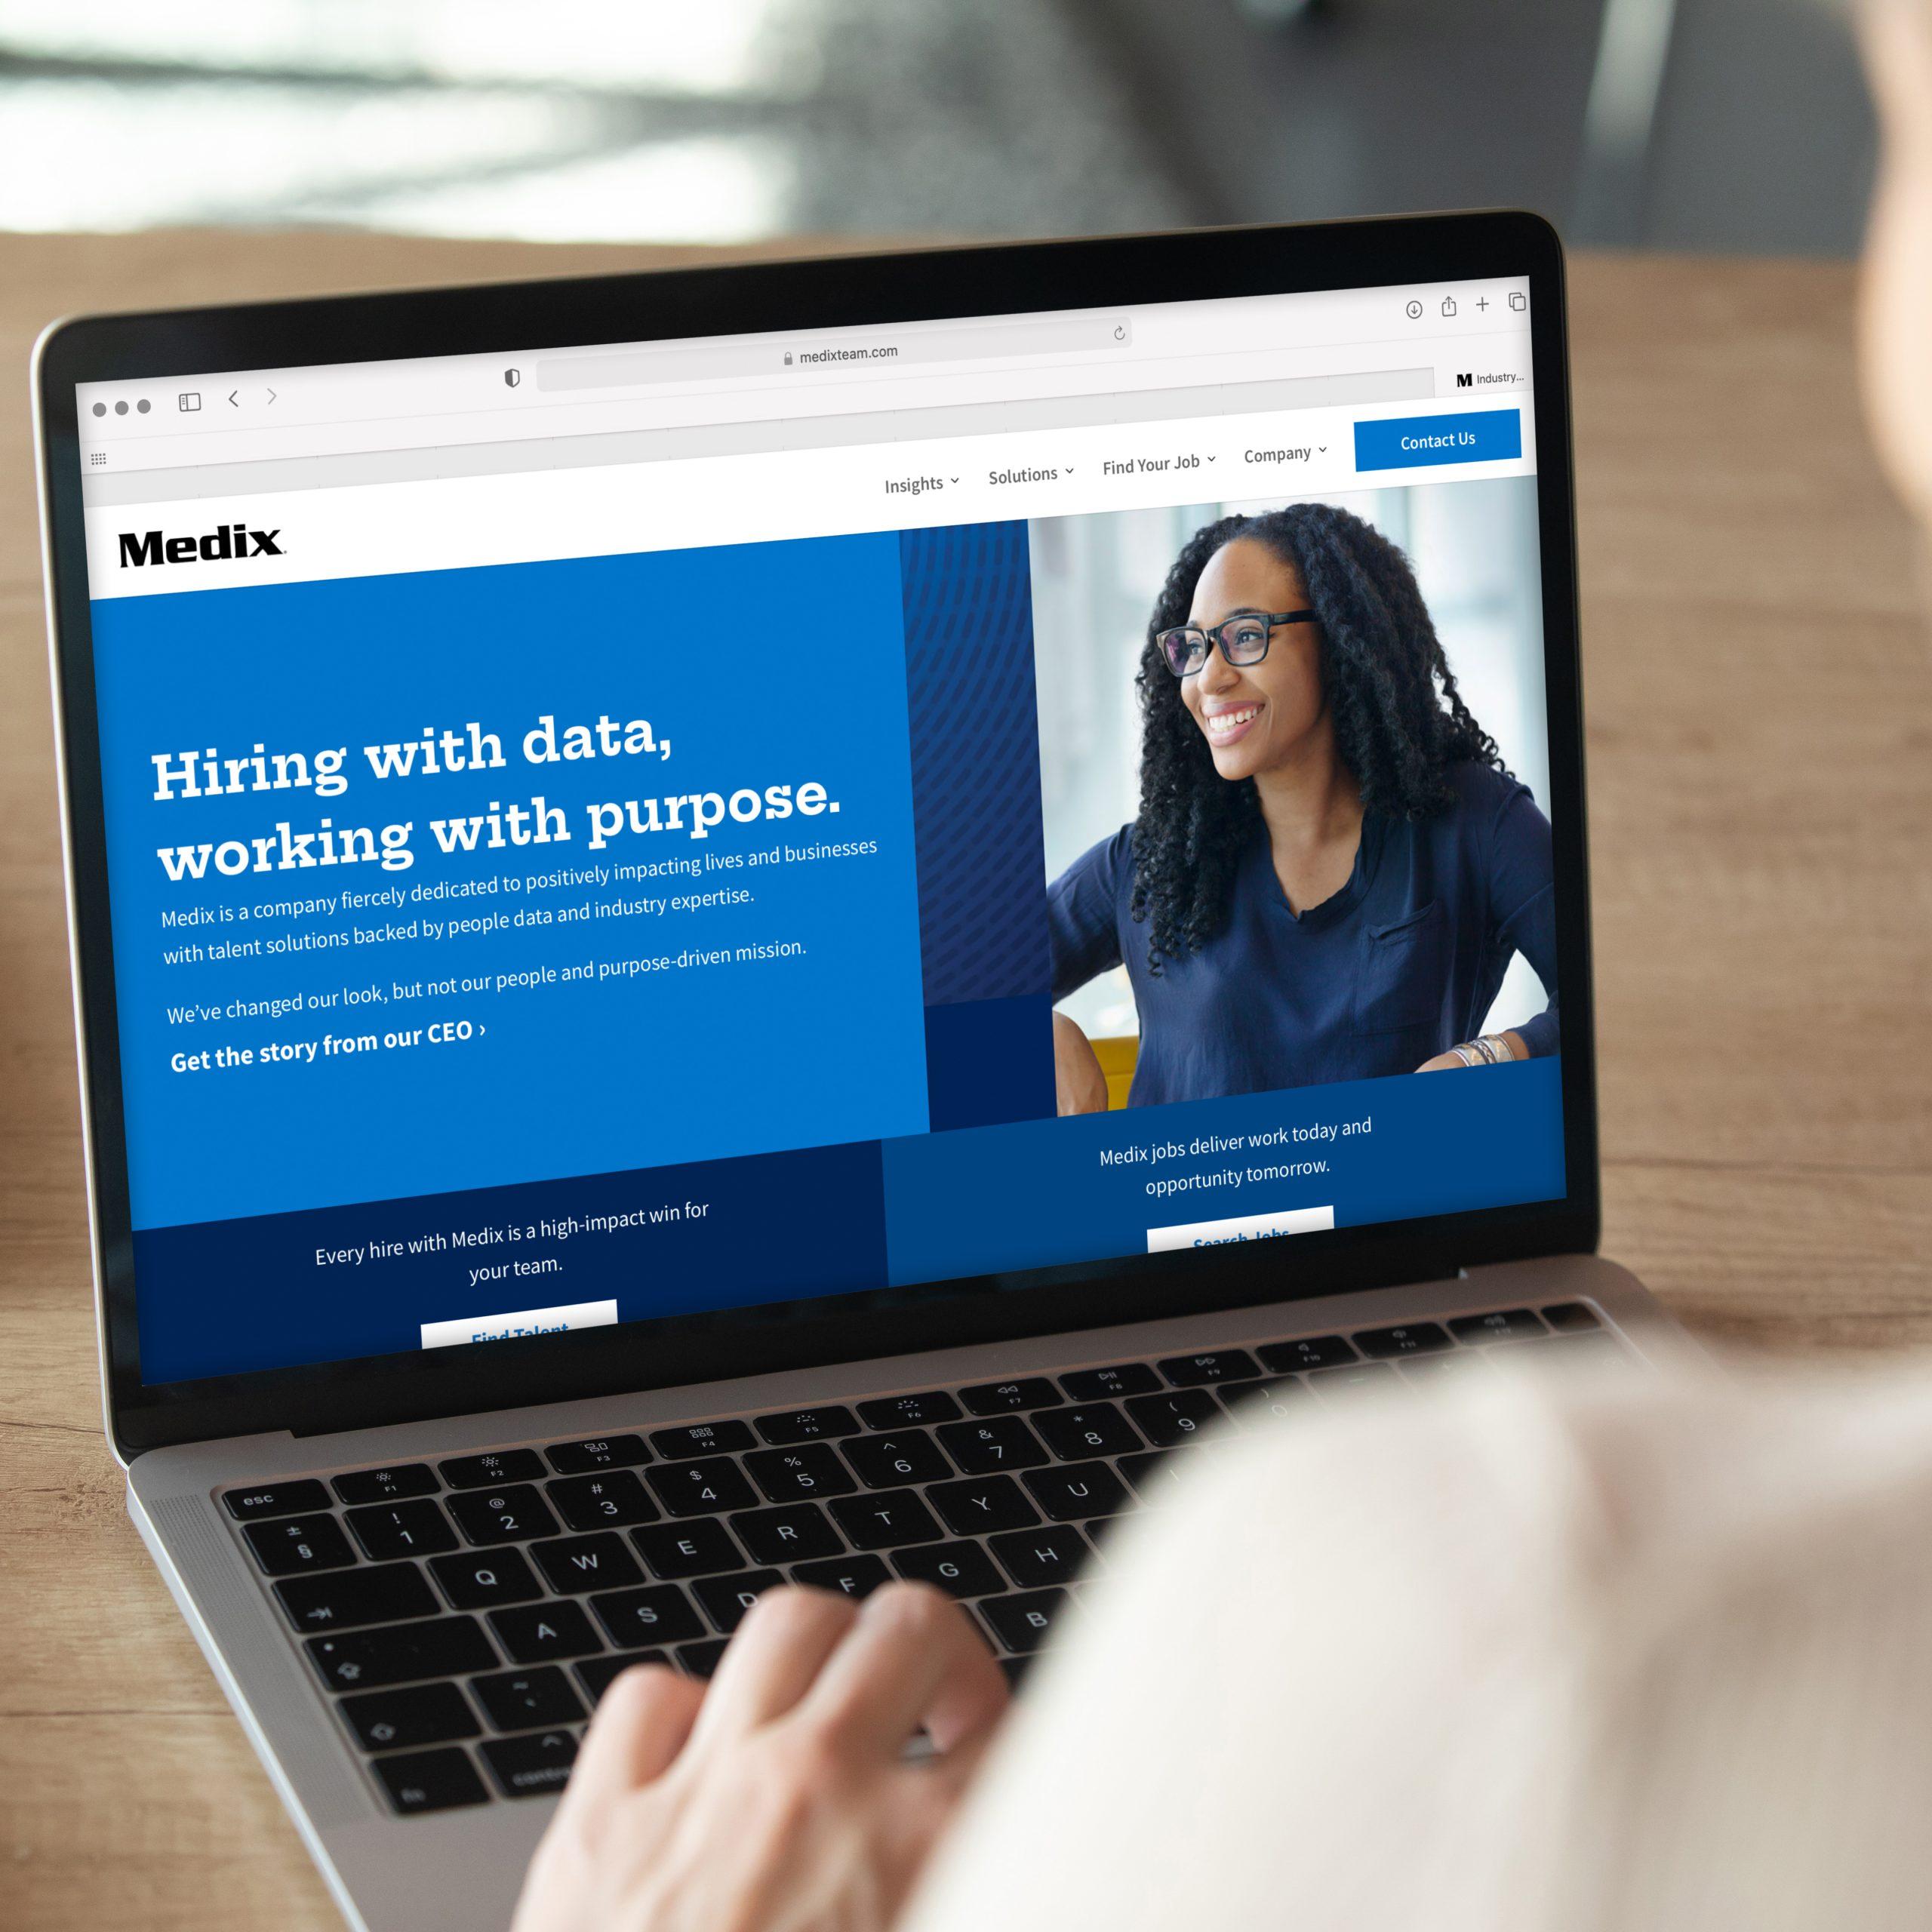 Back view of employee viewing a modern laptop featuring the Medix homepage. Page shows a happy woman, deep blue colors, and Medix's mission statement